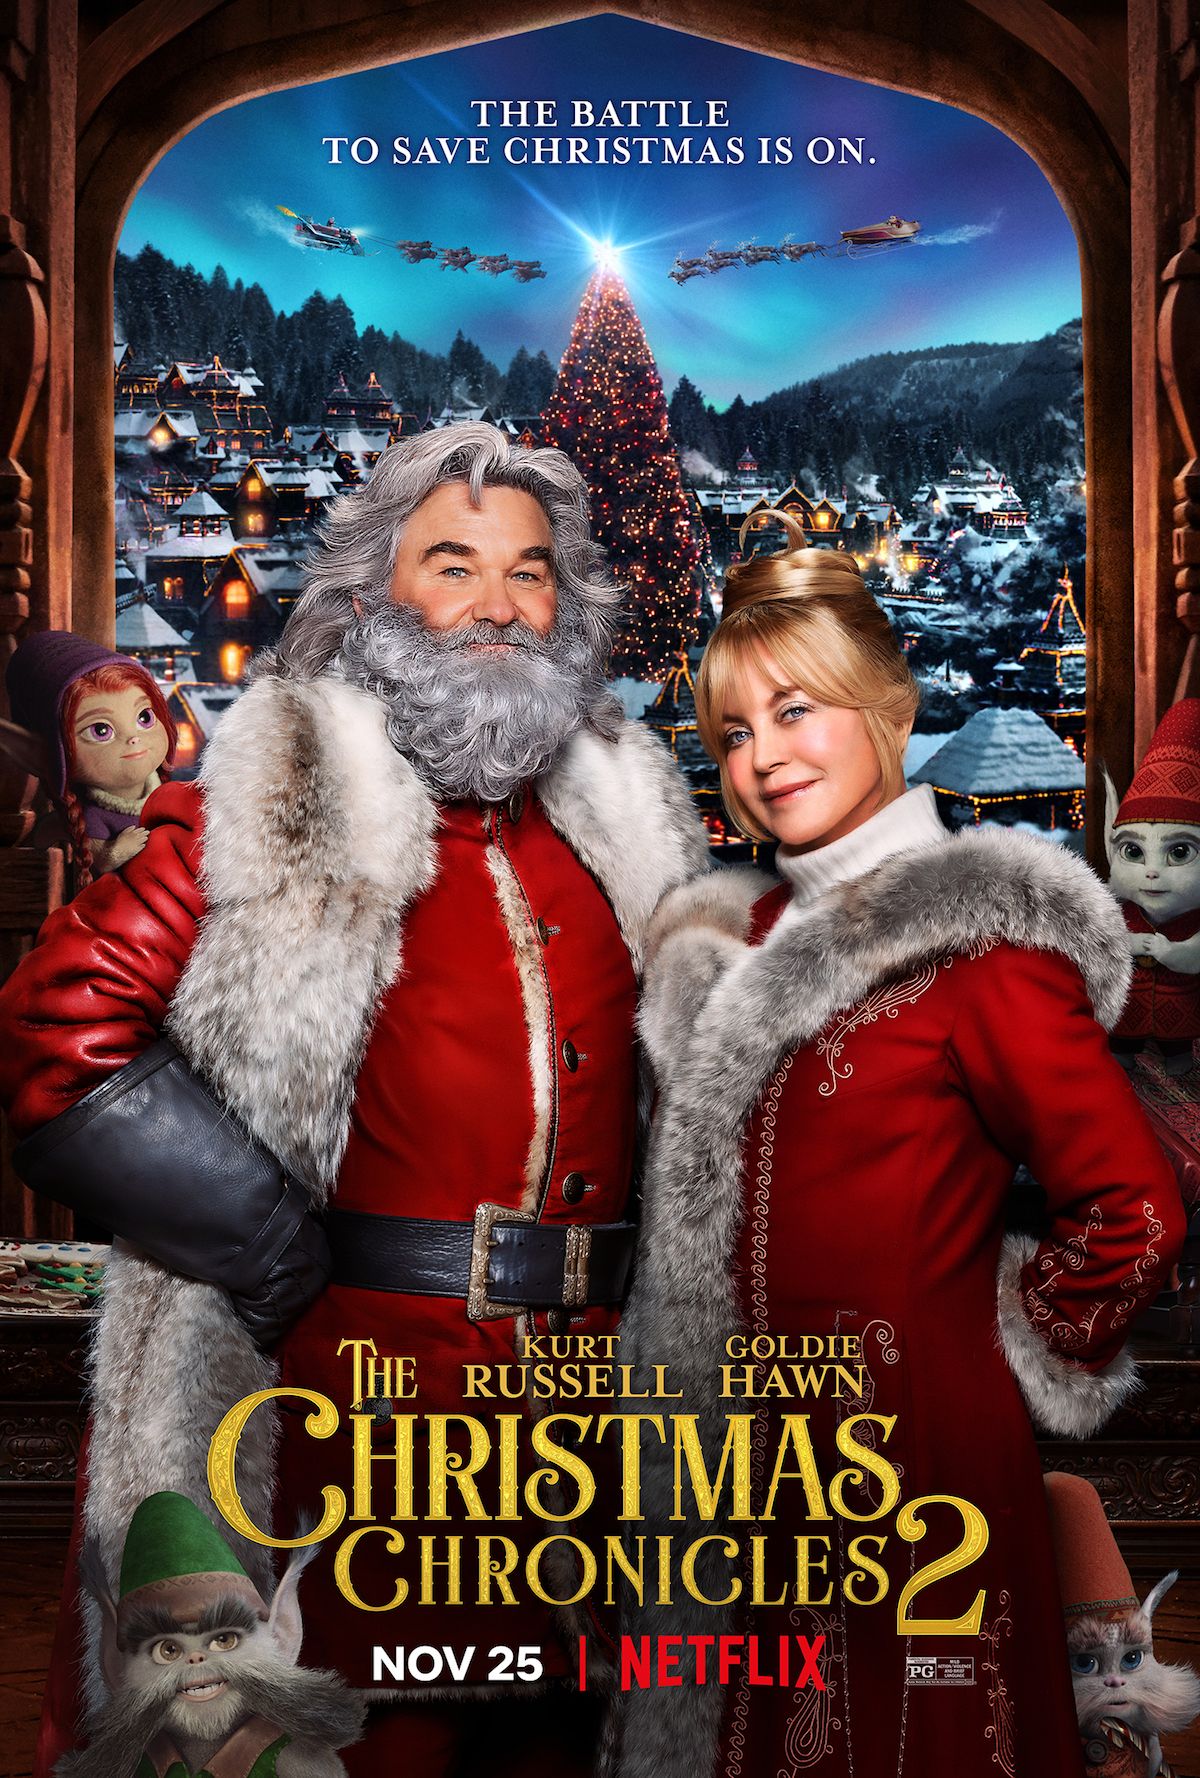 The Christmas Chronicles 2 Trailer Adds A Lot More Goldie Hawn As Mrs. Claus